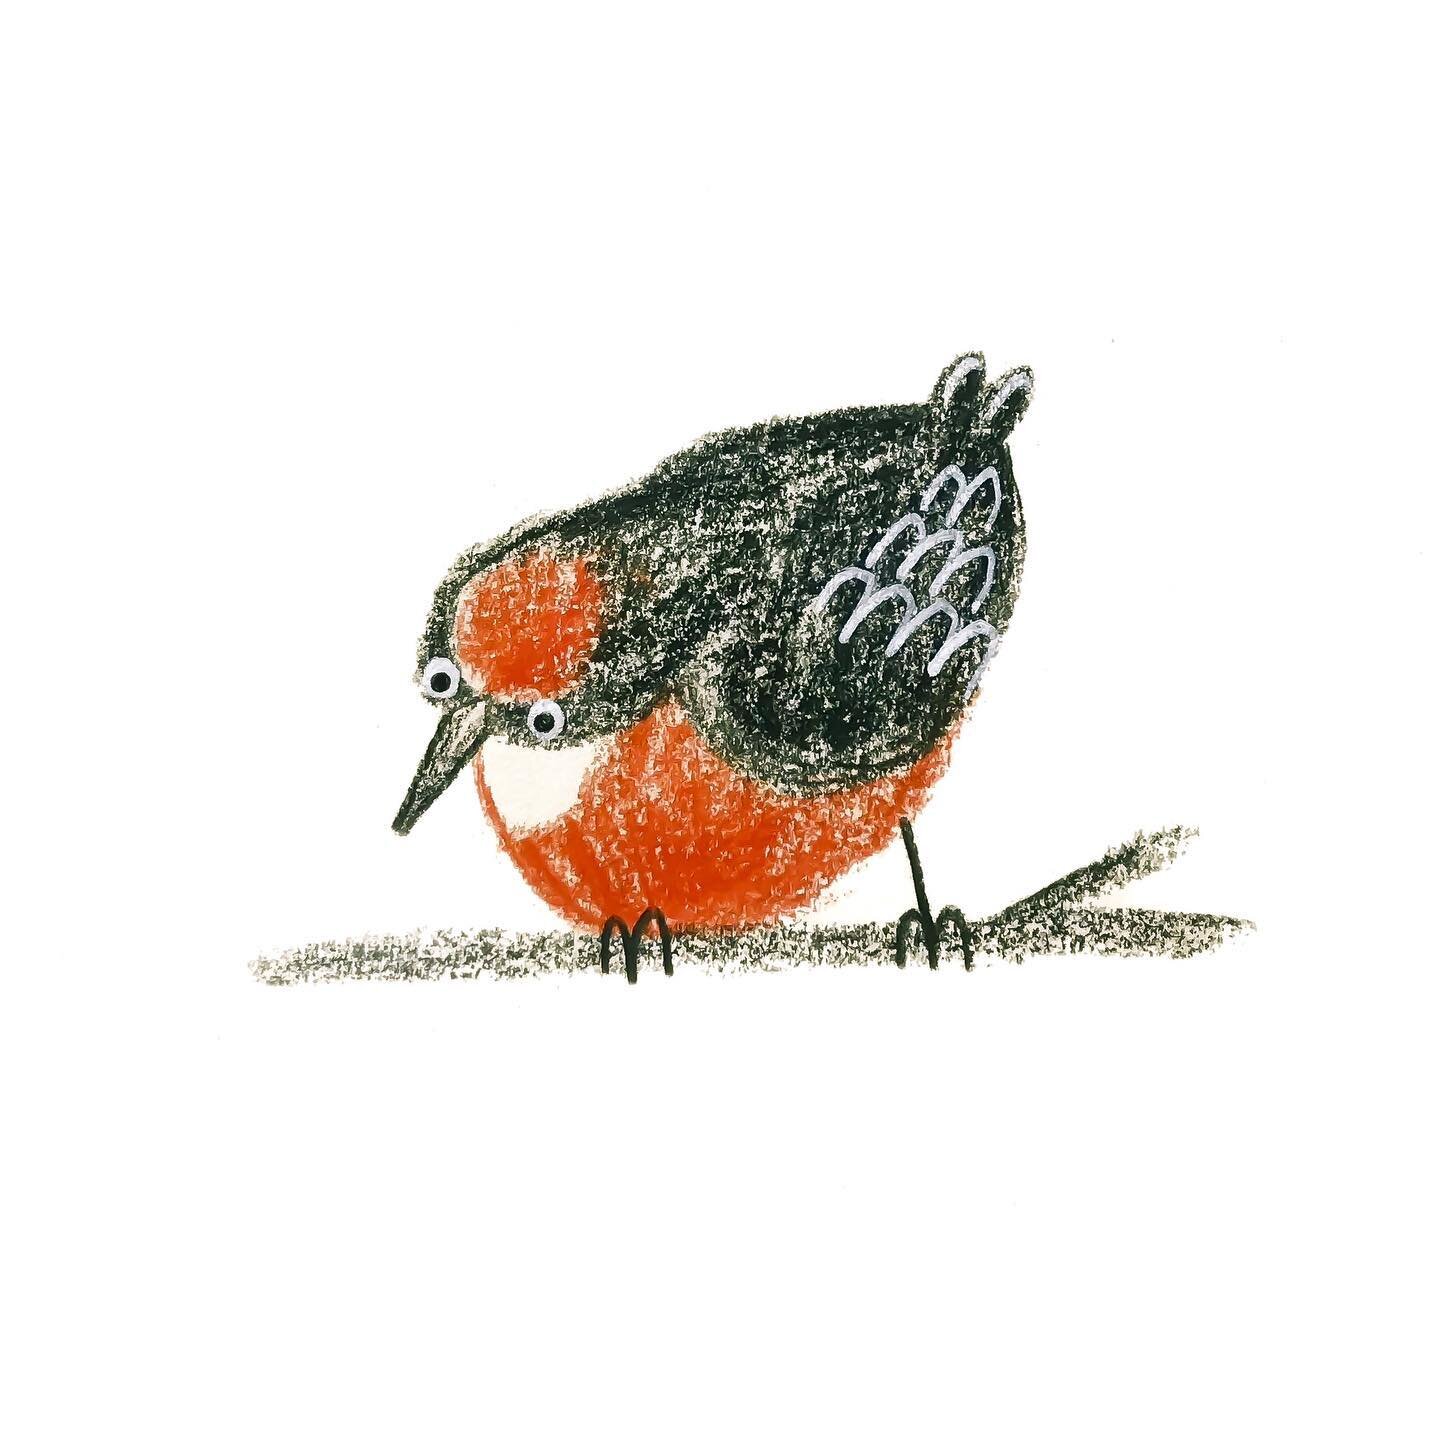 A crimson chat for day 24 of #birbfest2024 hosted by @monkeymintaka . I wonder what he&rsquo;s spotted? 
&bull;
&bull;
&bull;
#sketchaday #dailychallenge #kidsillustration #picturebookartist #crimsonchat